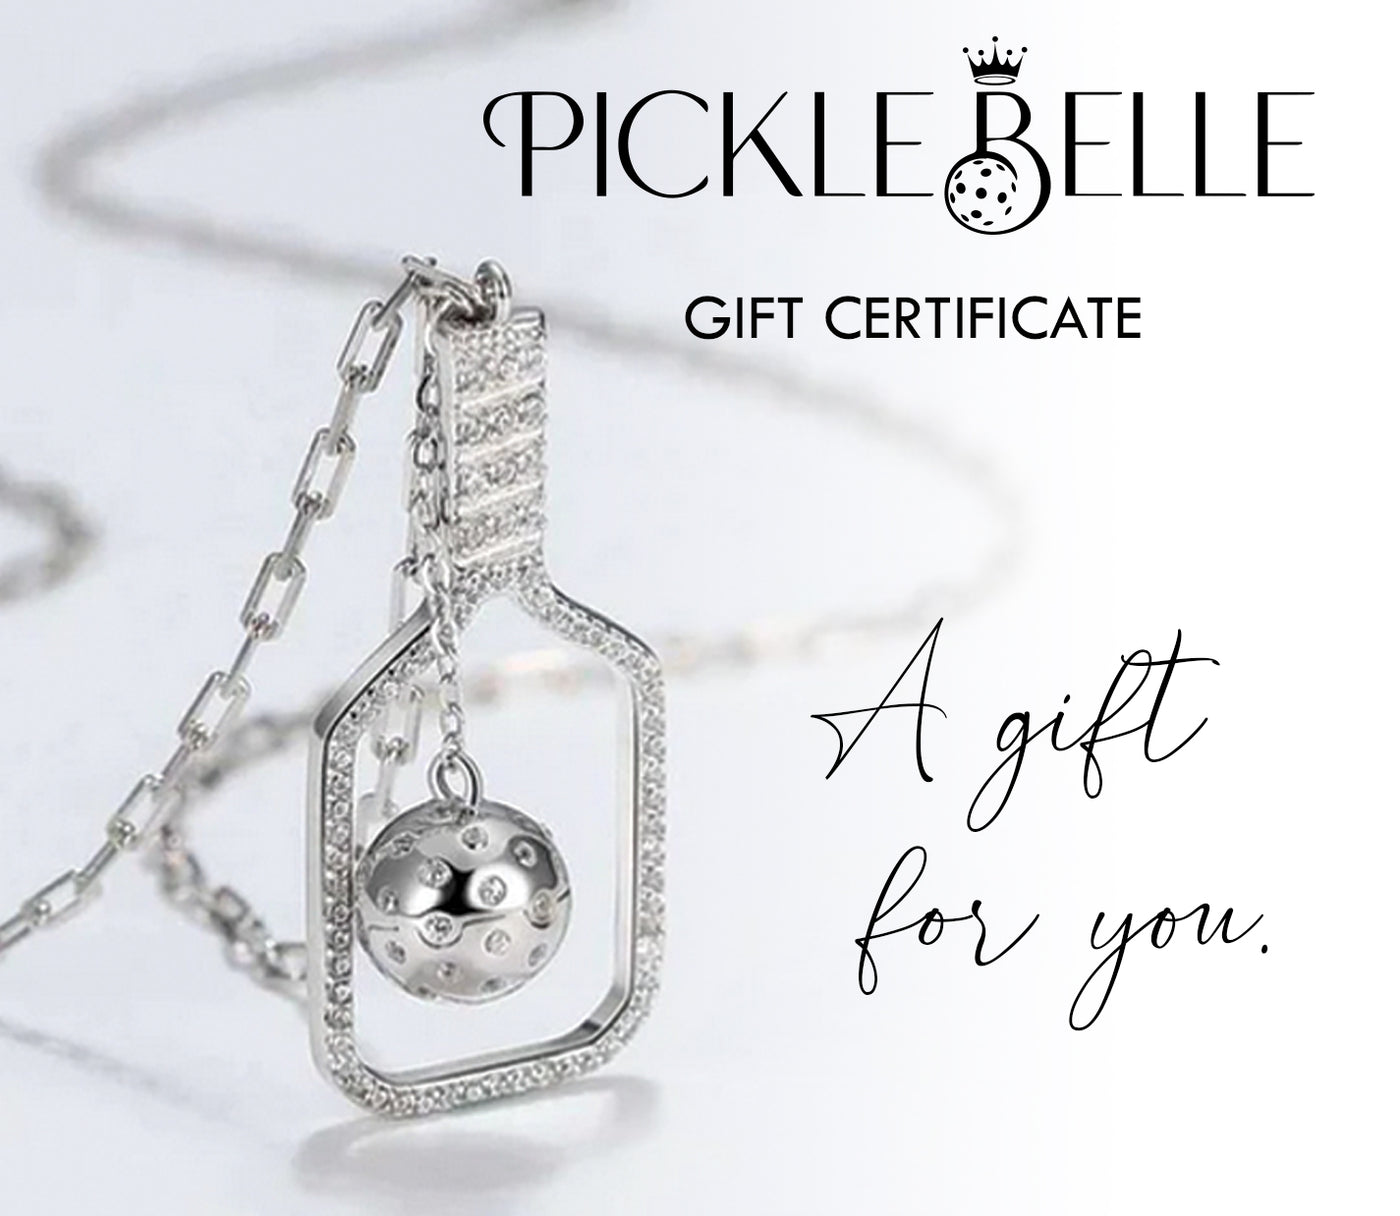 Picklebelle Gift Certificate A gift for you